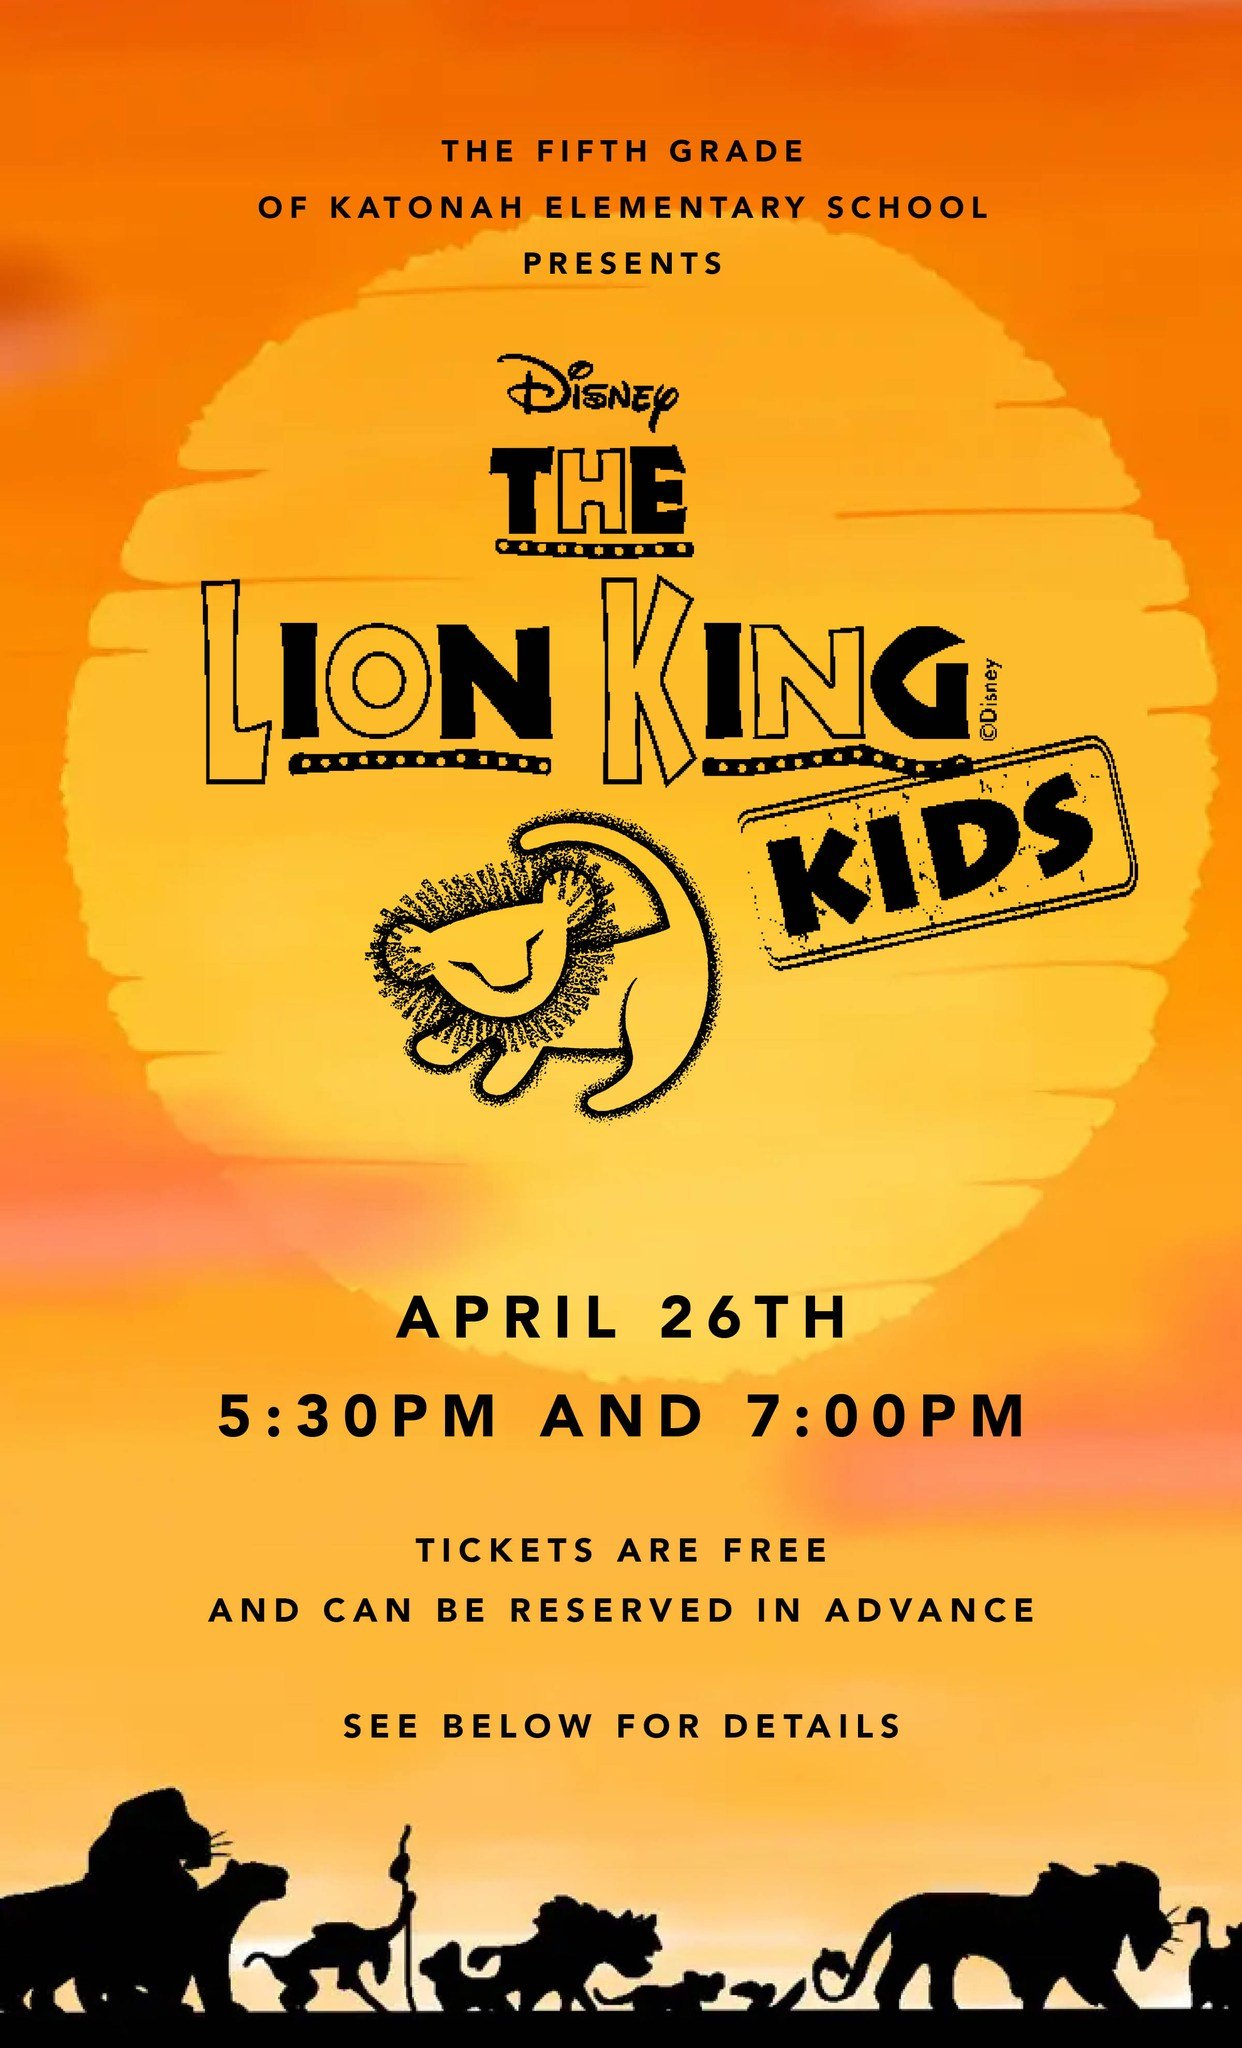 Come see the 5th Grade Play THE LION KING this Friday at 5:30 and 7:00 PM! KES Kids and their families can attend either time slot.

Want to treat your favorite performer with some flowers? Only a few are available to reserve in advance: LINK IN BIO!